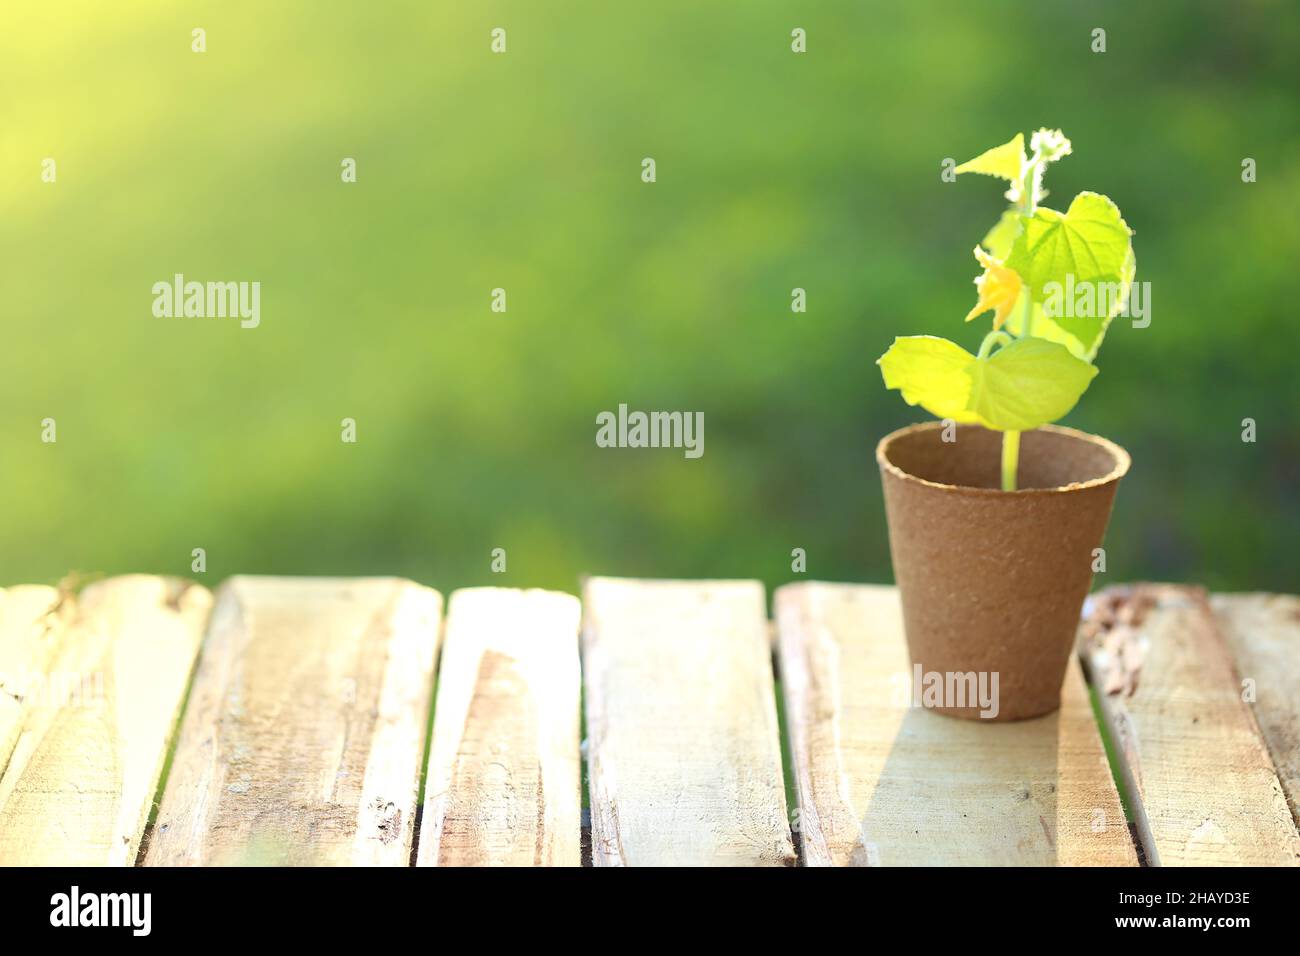 seedlings in peat cups on a wooden table in a spring garden.Saplings and planting material. Spring work in the garden.Farming and growing greenery Stock Photo